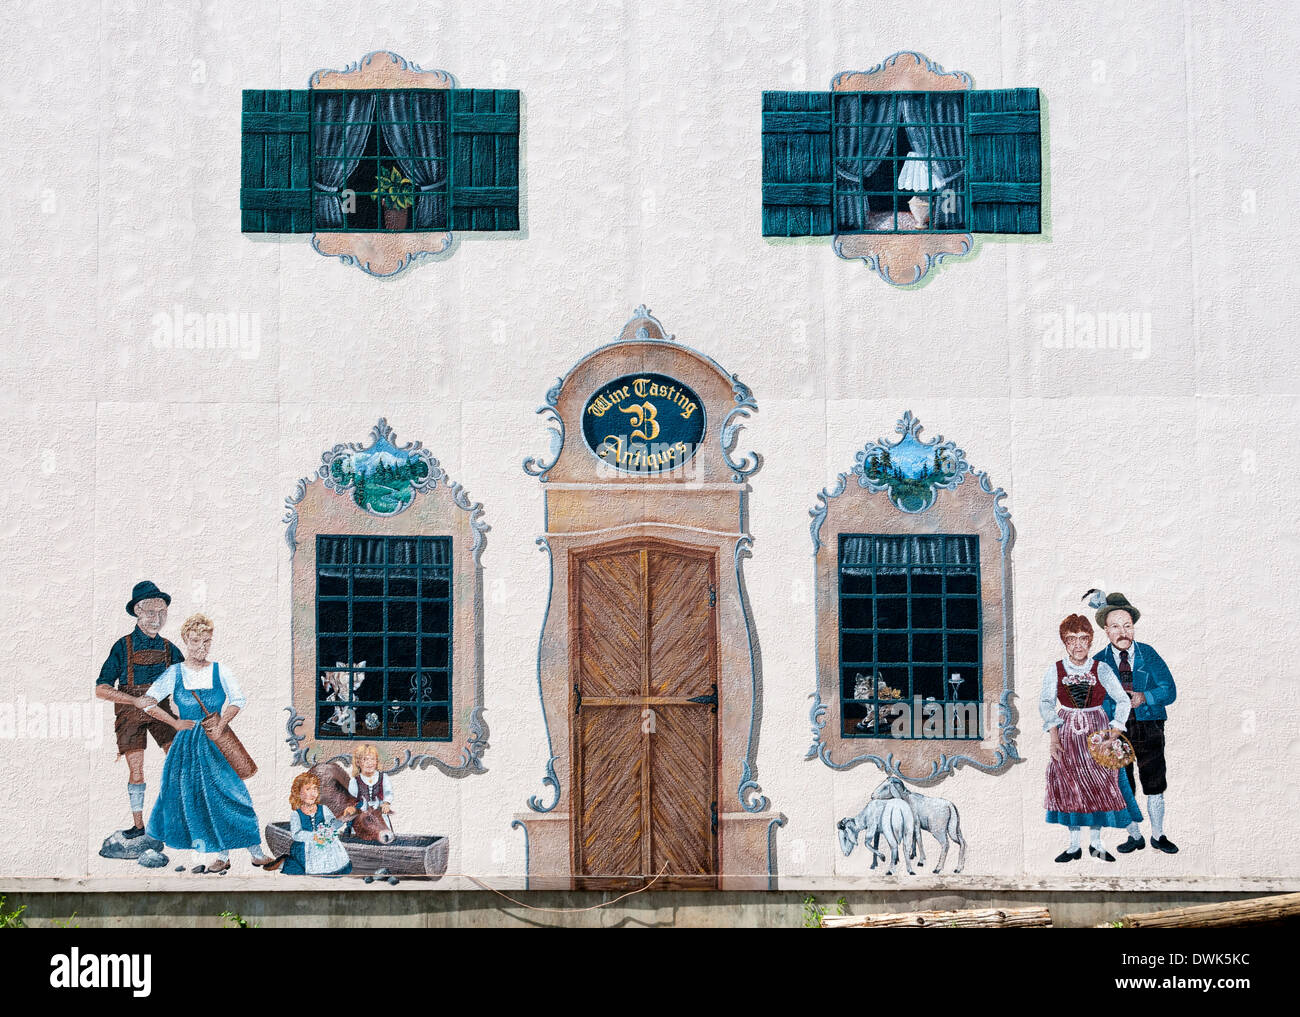 Washington, Leavenworth, established 1890,1960s began the remodel to look of a Bavarian Village, wall mural Stock Photo